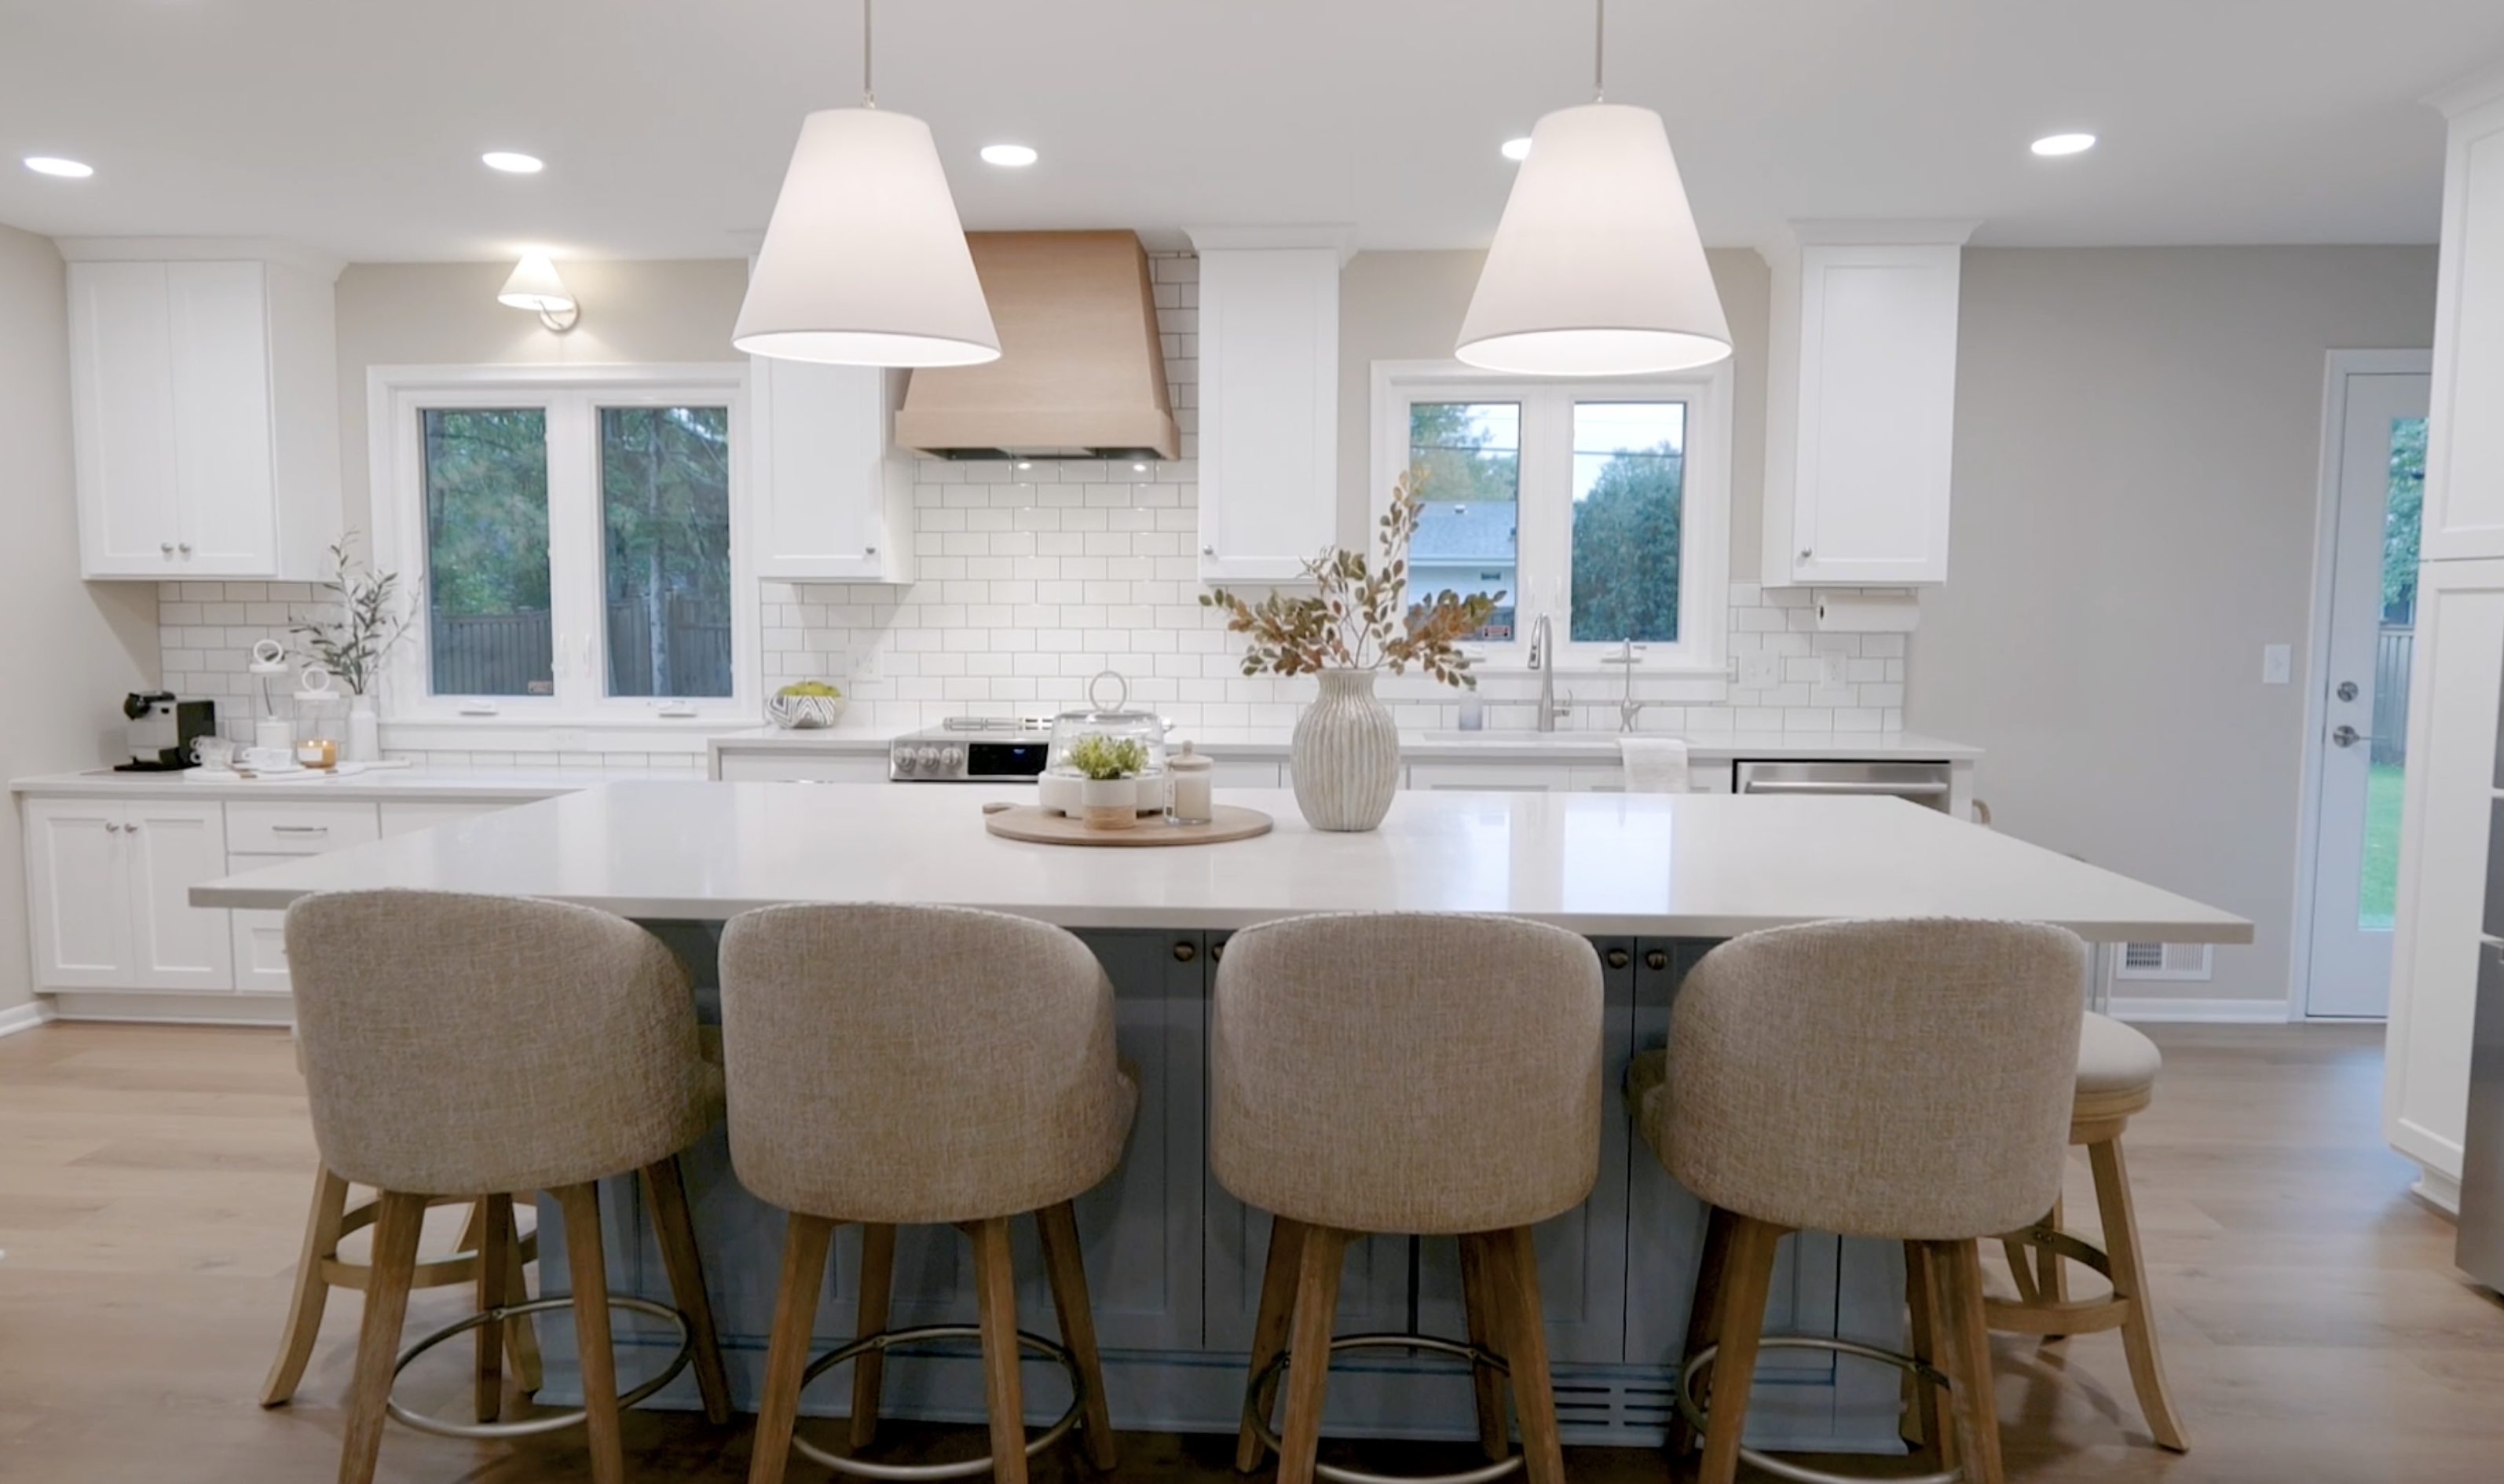 Coastal style kitchen interior with a central island and bar stools.